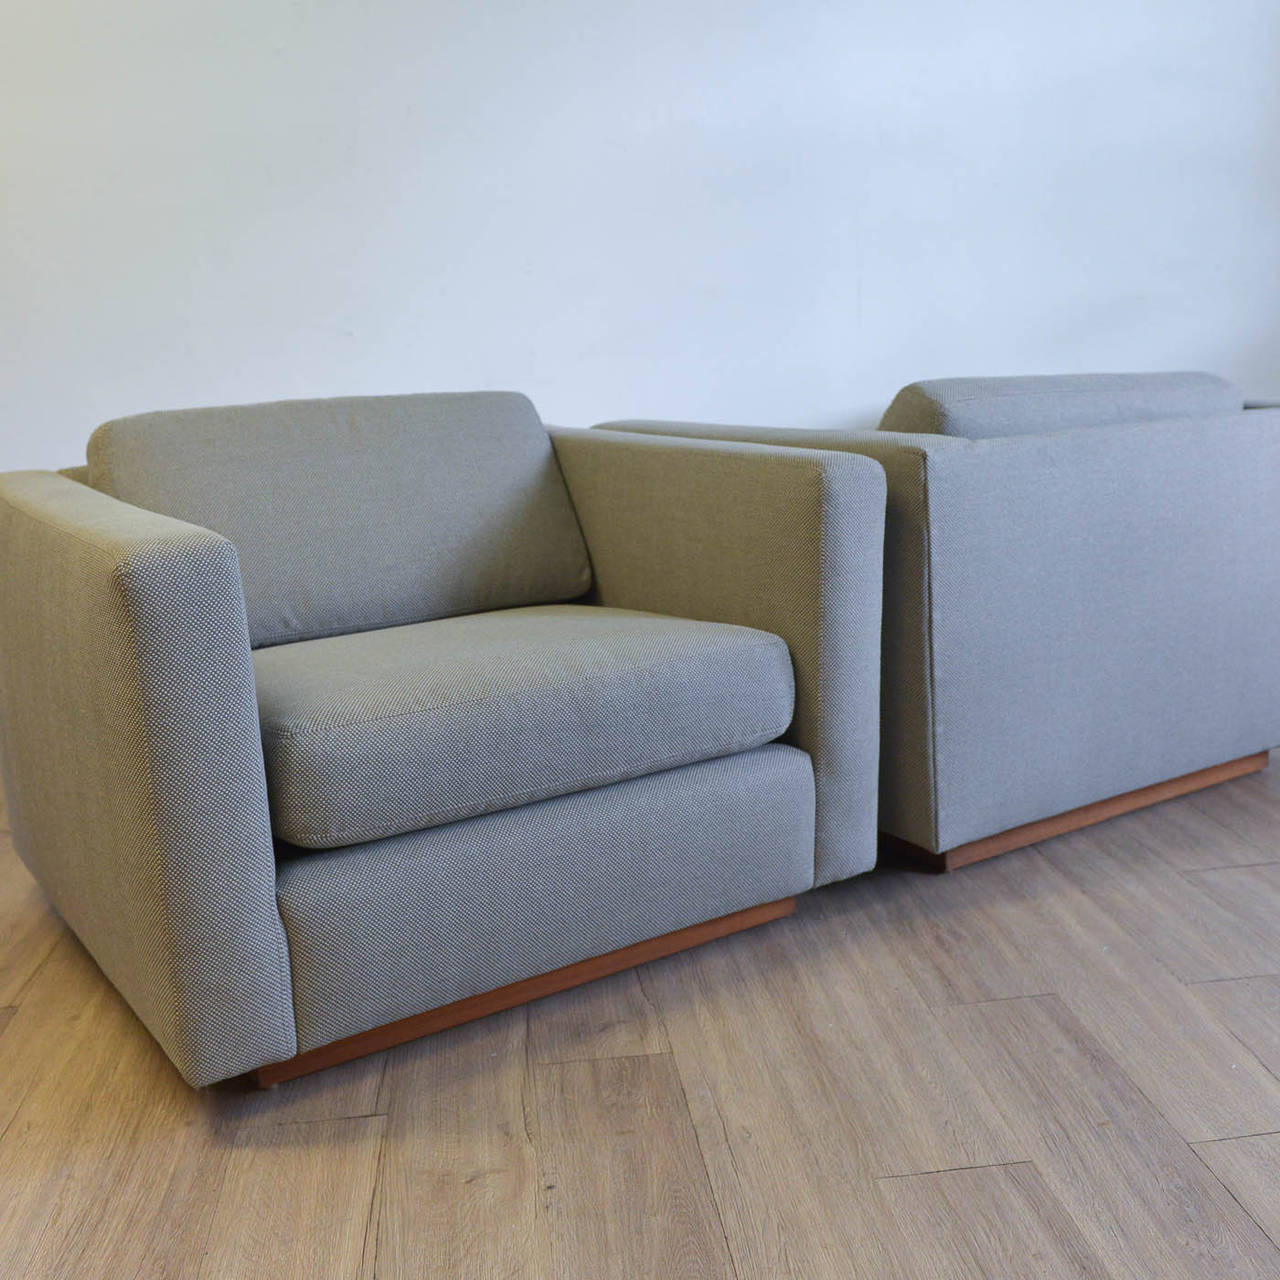 A beautiful pair of original Harvey Probber Cube club chairs. Extremely heavy, well built chairs are on walnut plinth bases and recovered with a very nice grey/beige textured fabric. All new foam and cushions have been added and these chairs are